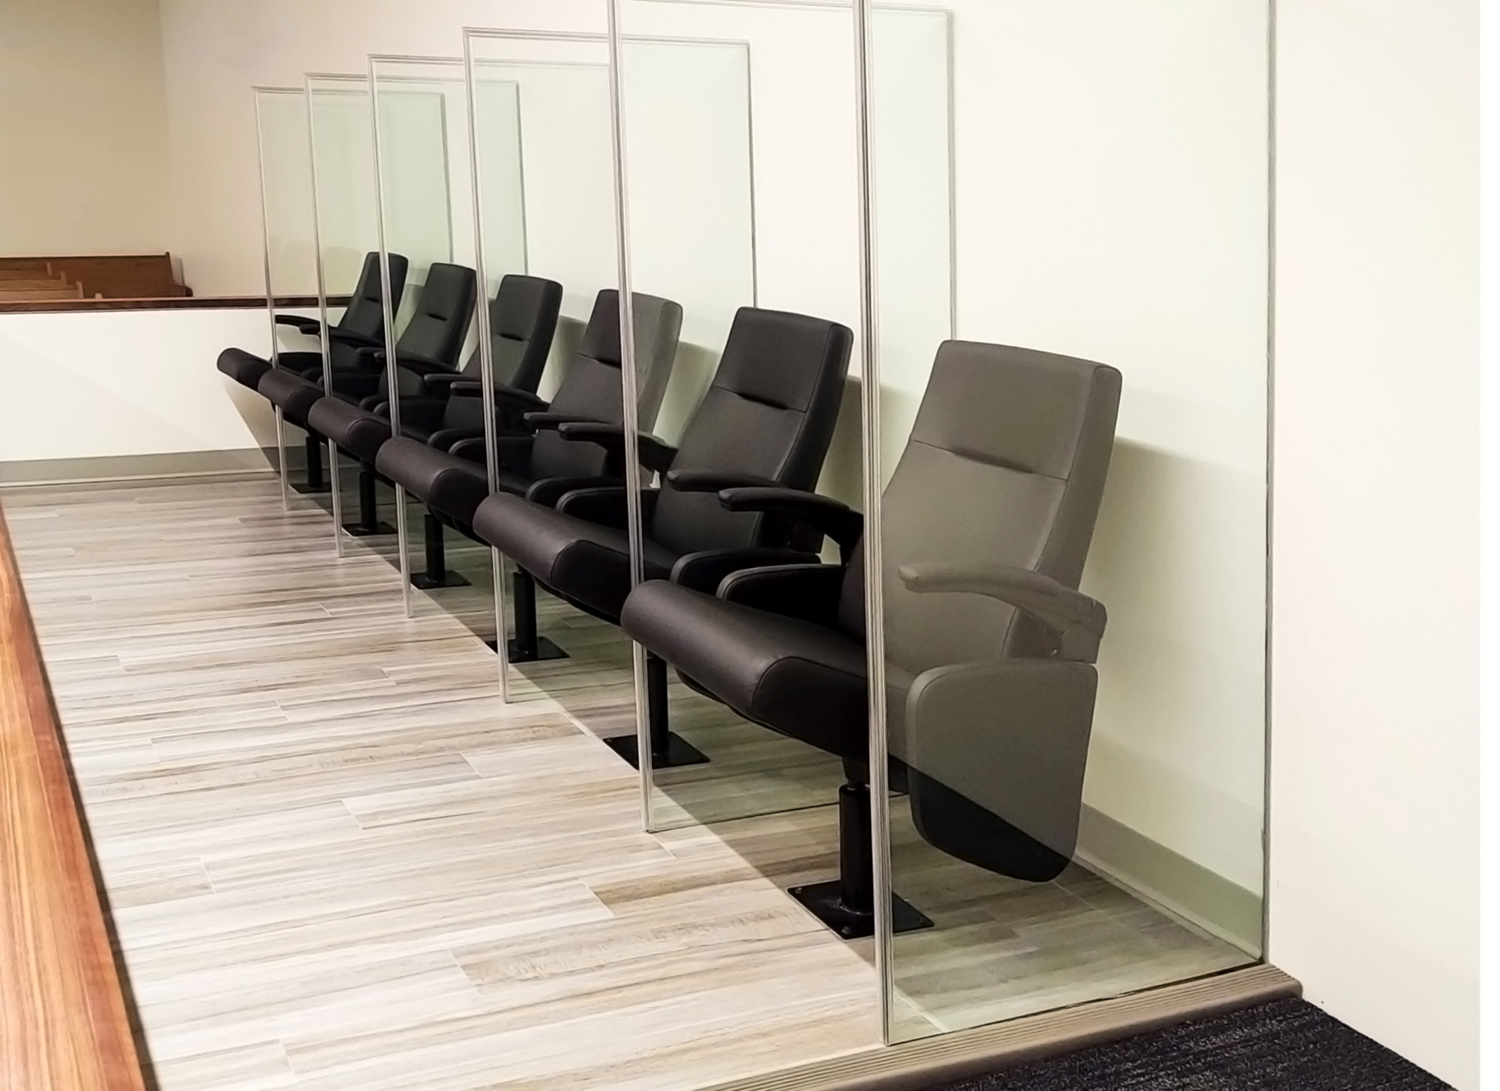 Jury Seats with Plexiglass to help stop spread of Covid